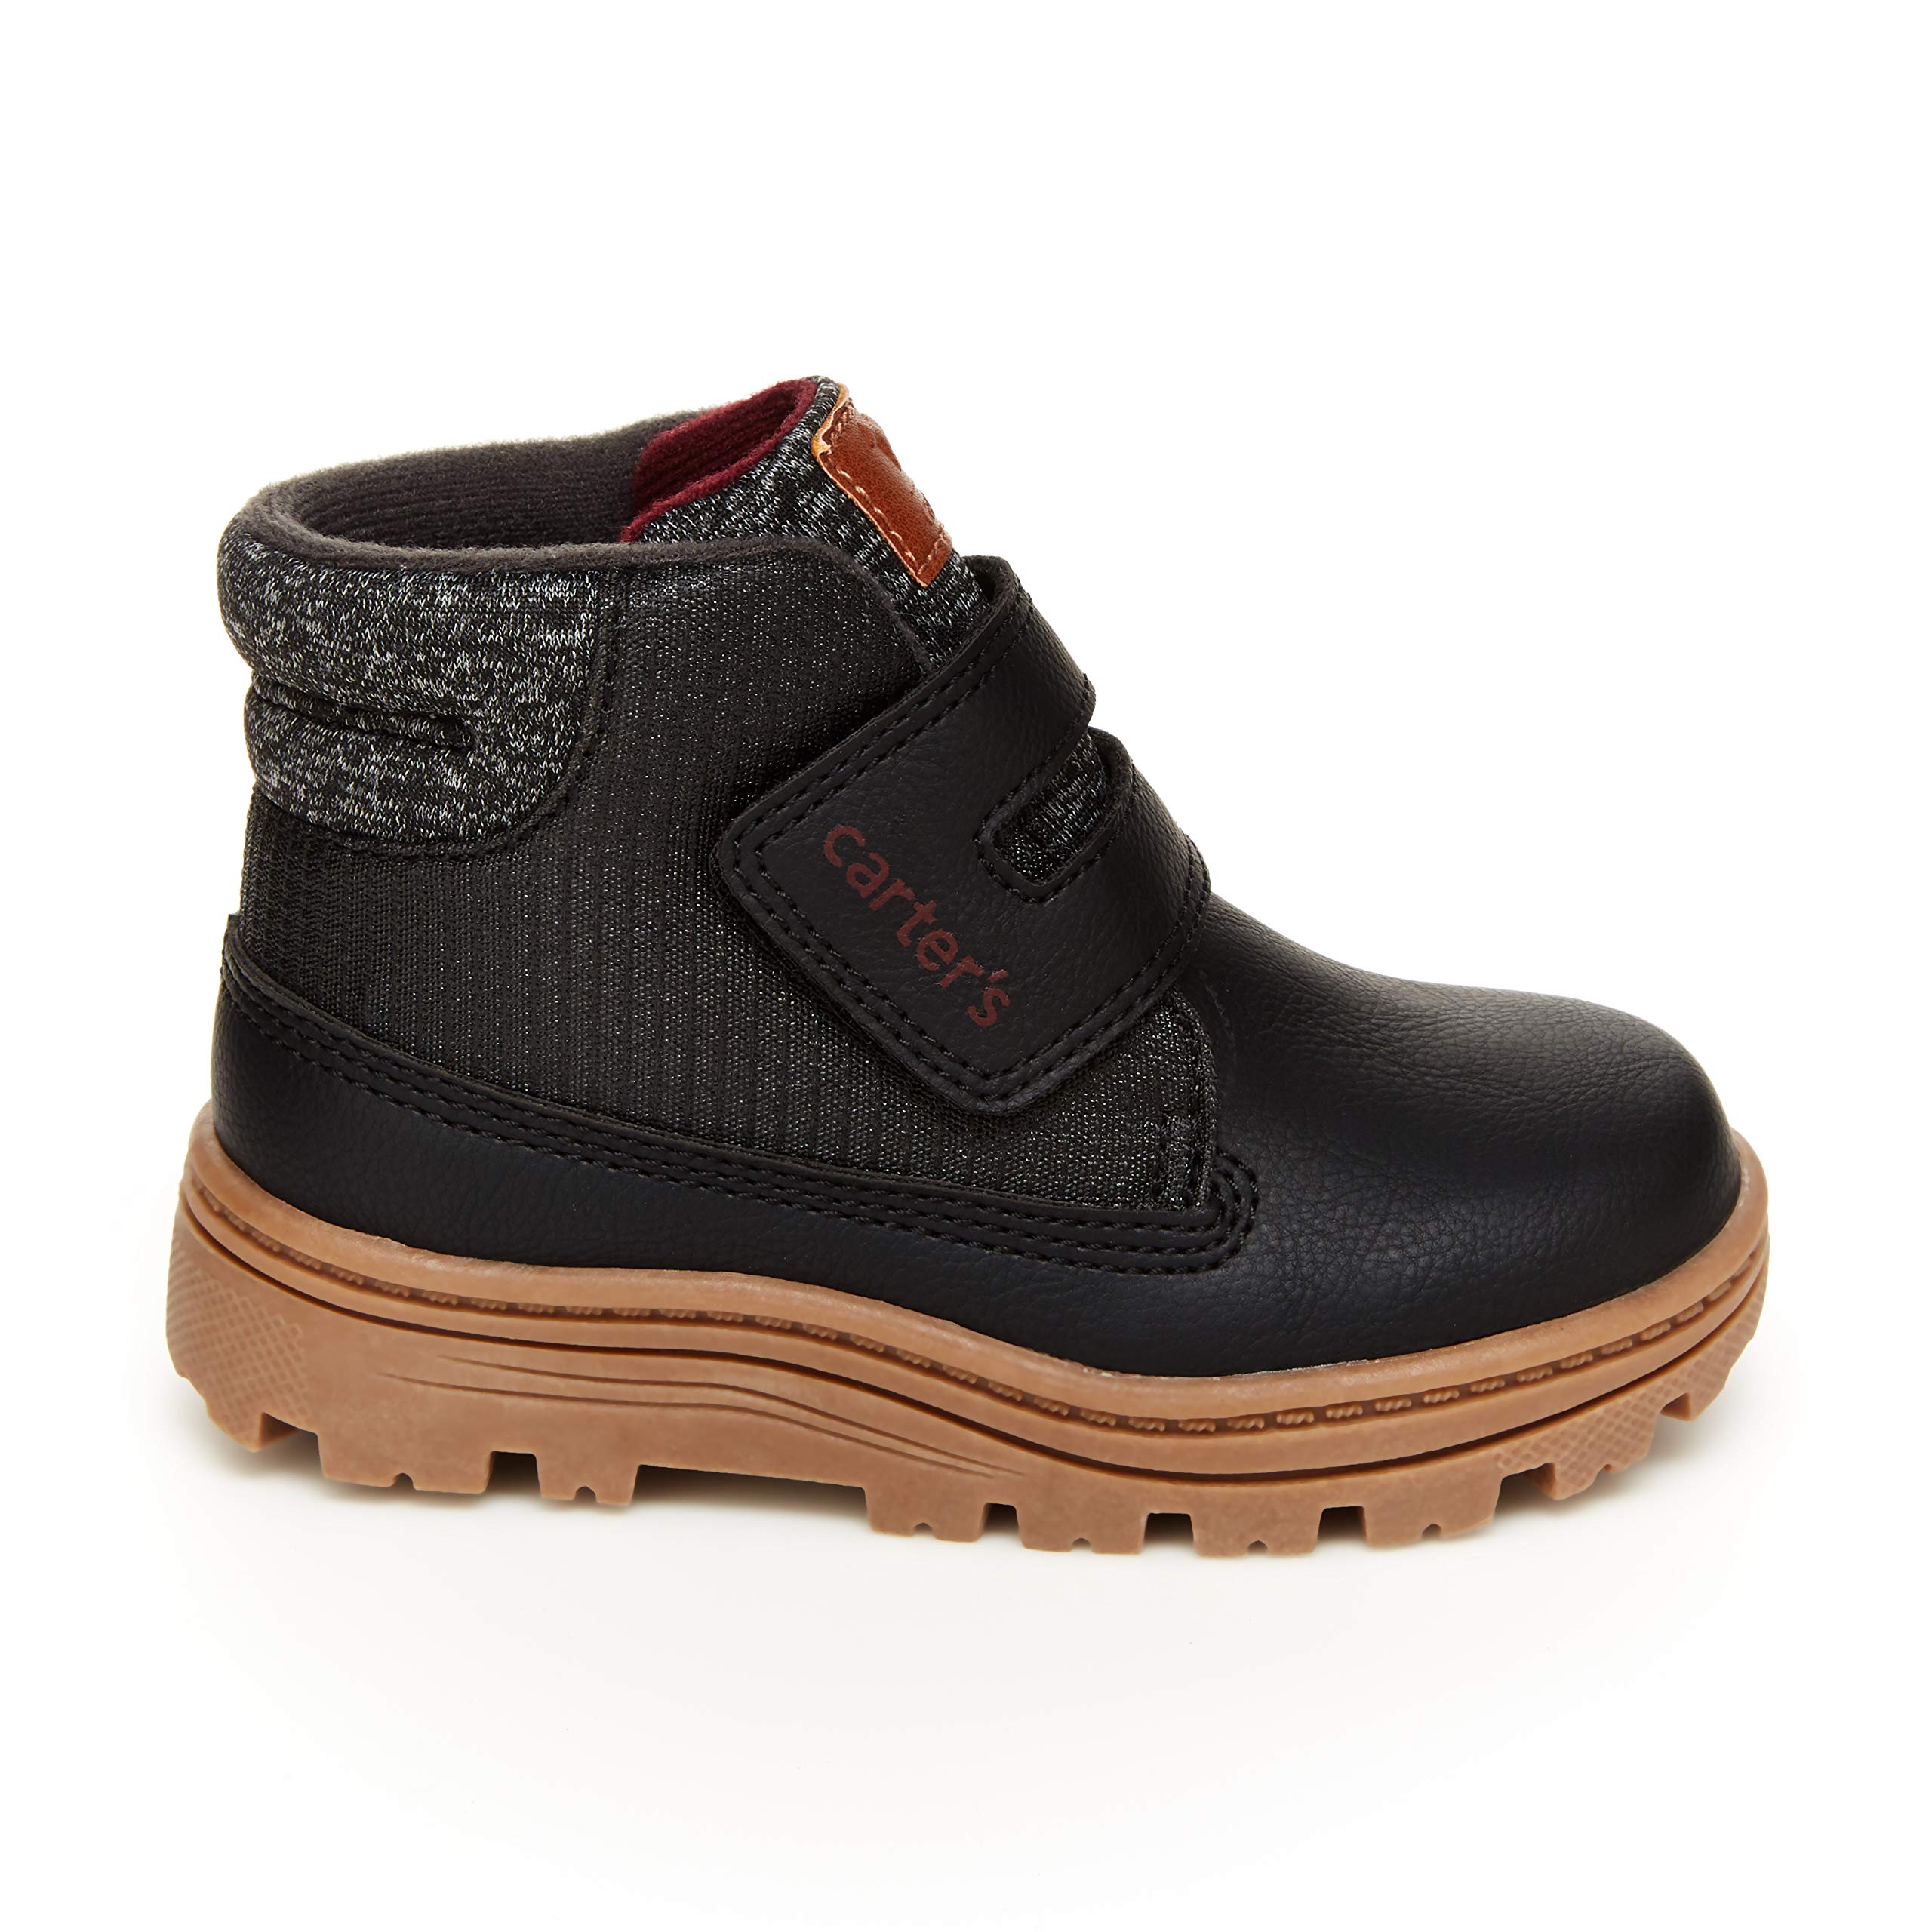 Carter's Boy's Kelso Fashion Boot